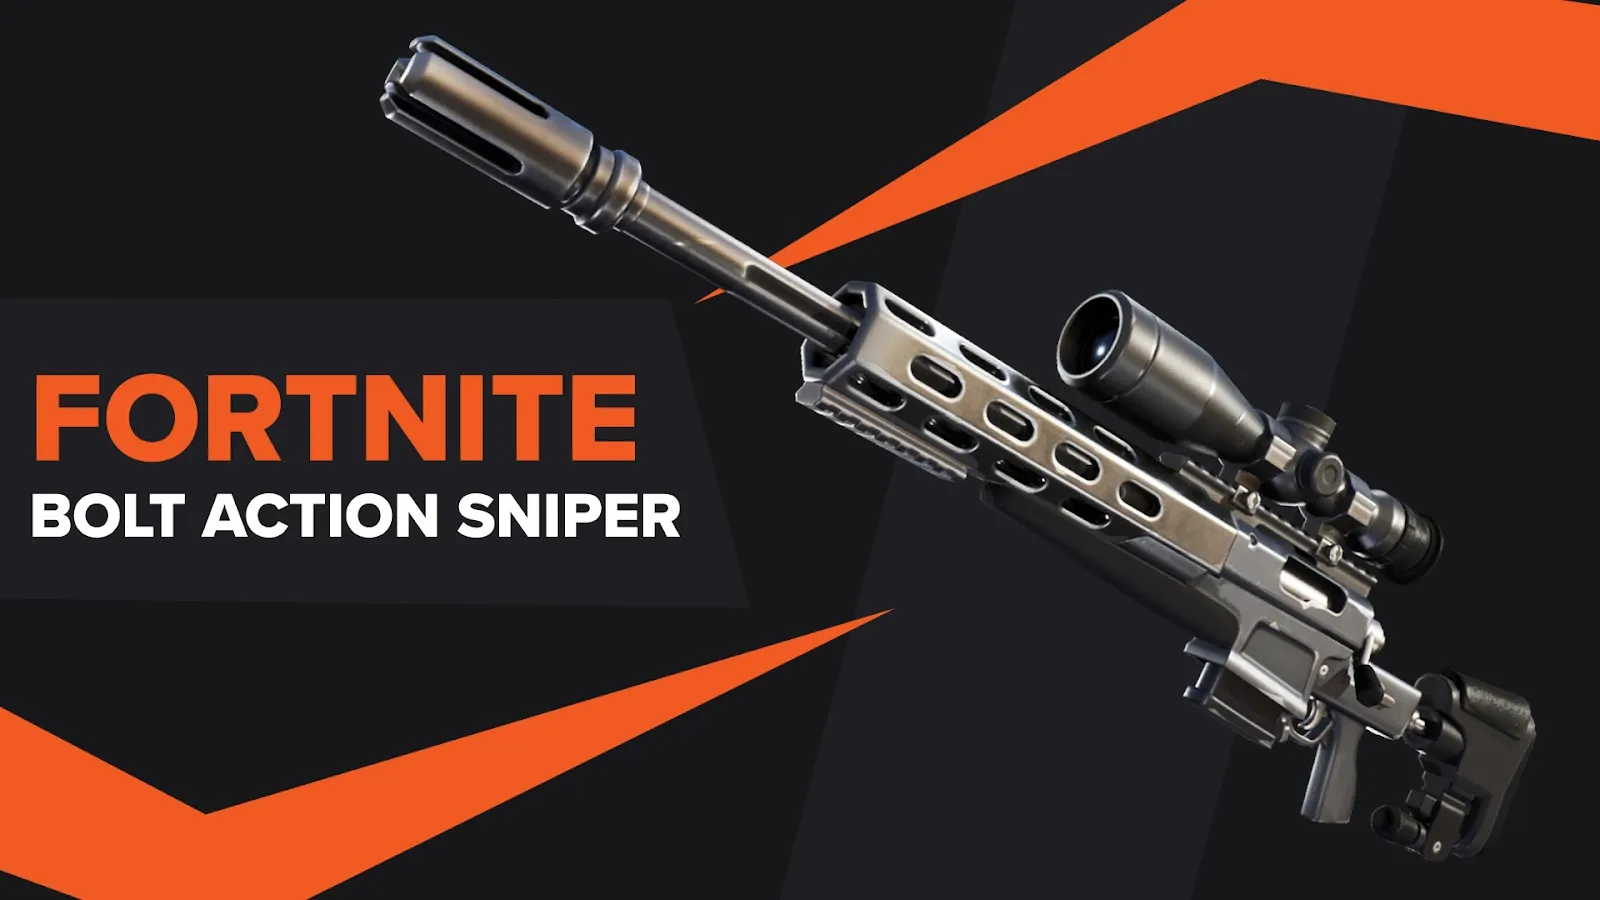 Bolt Action Sniper Rifle Fortnite Weapon